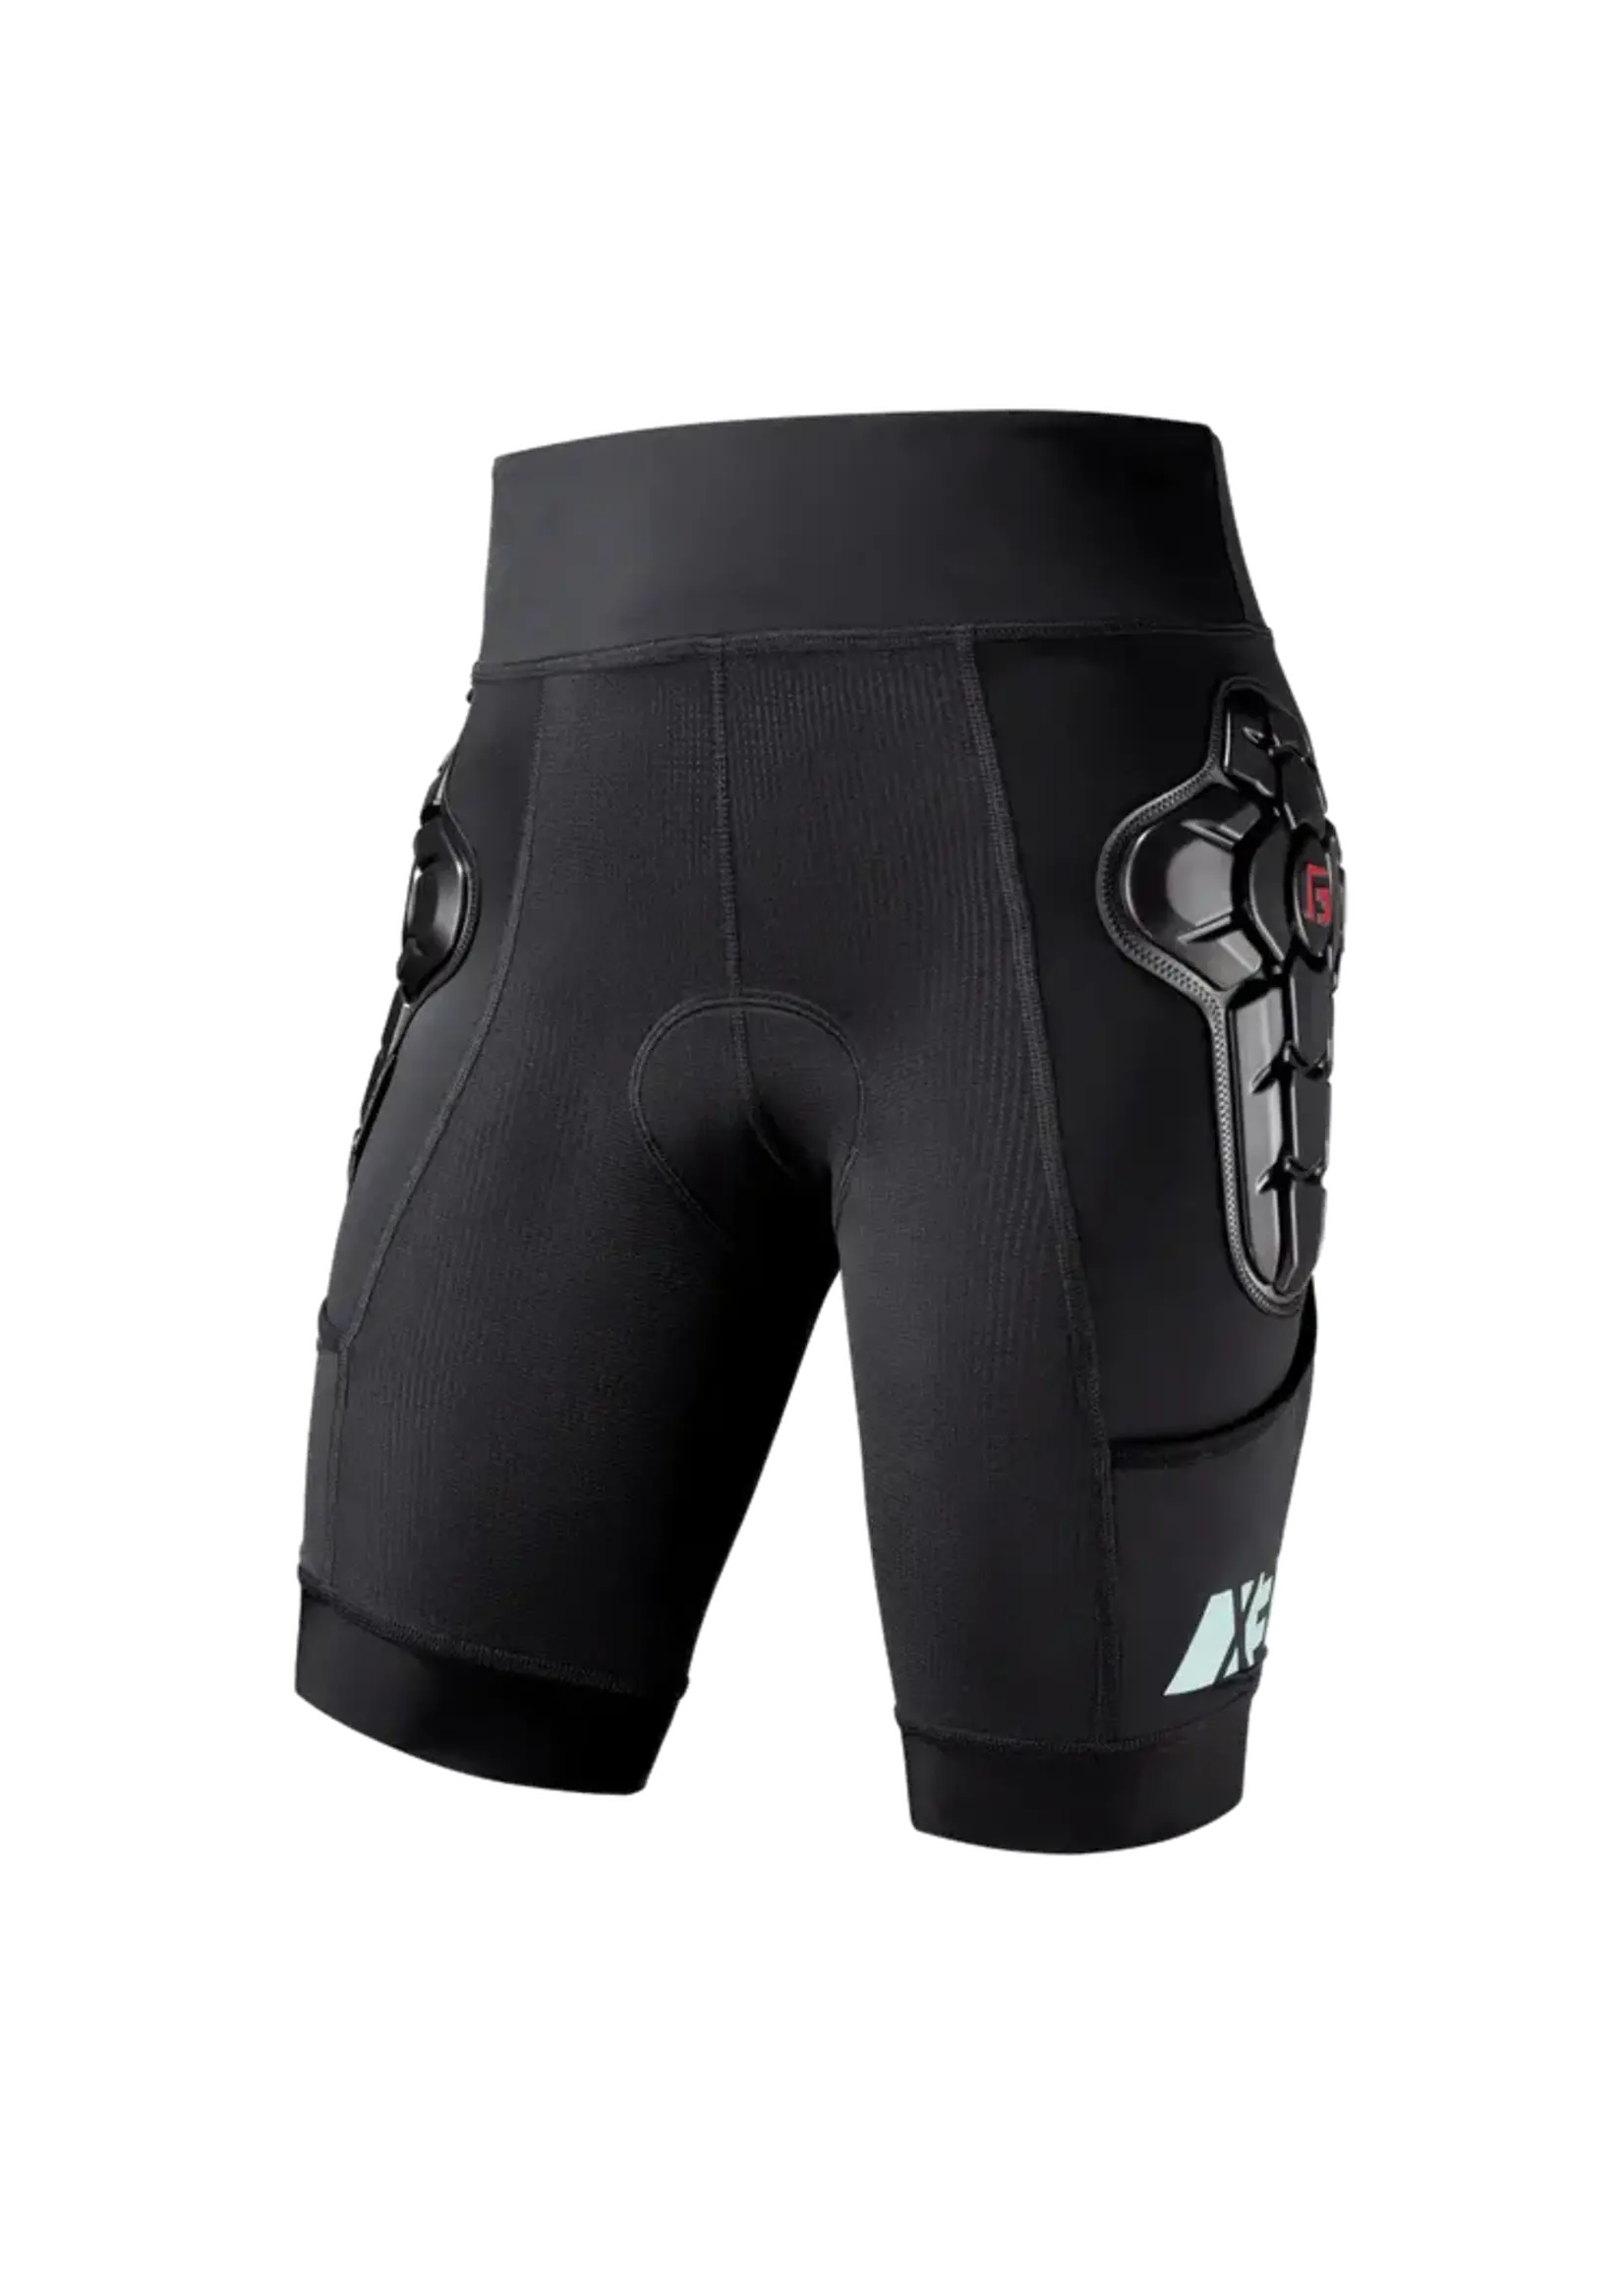 G-FORM Protection G-Form Short Pro X3 Womans